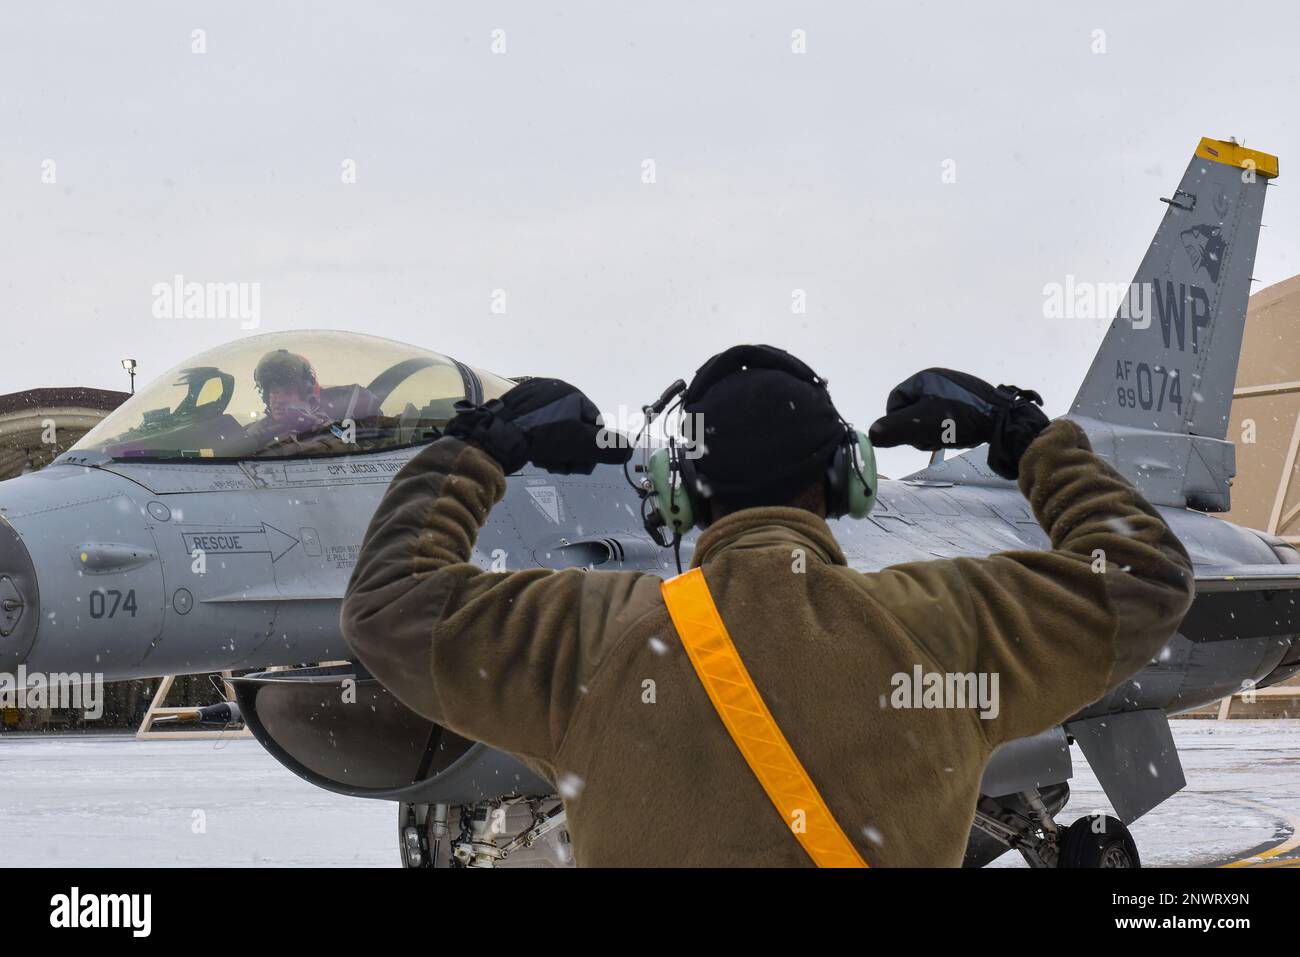 Airman 1st Class Zakkee Conwell, 80th Fighter Generation Squadron crew chief, poses with the ‘Crush ‘em’ hand gesture as U.S. Air Force Lt. Gen. Scott “Rolls” Pleus, 7th Air Force commander prepares to depart in an F-16 Fighting Falcon, at Kunsan Air Base, Republic of Korea, Jan. 26, 2023. The 80th Fighter Generation Squadron ‘Juvats’ are also known as the Headhunters. Stock Photo